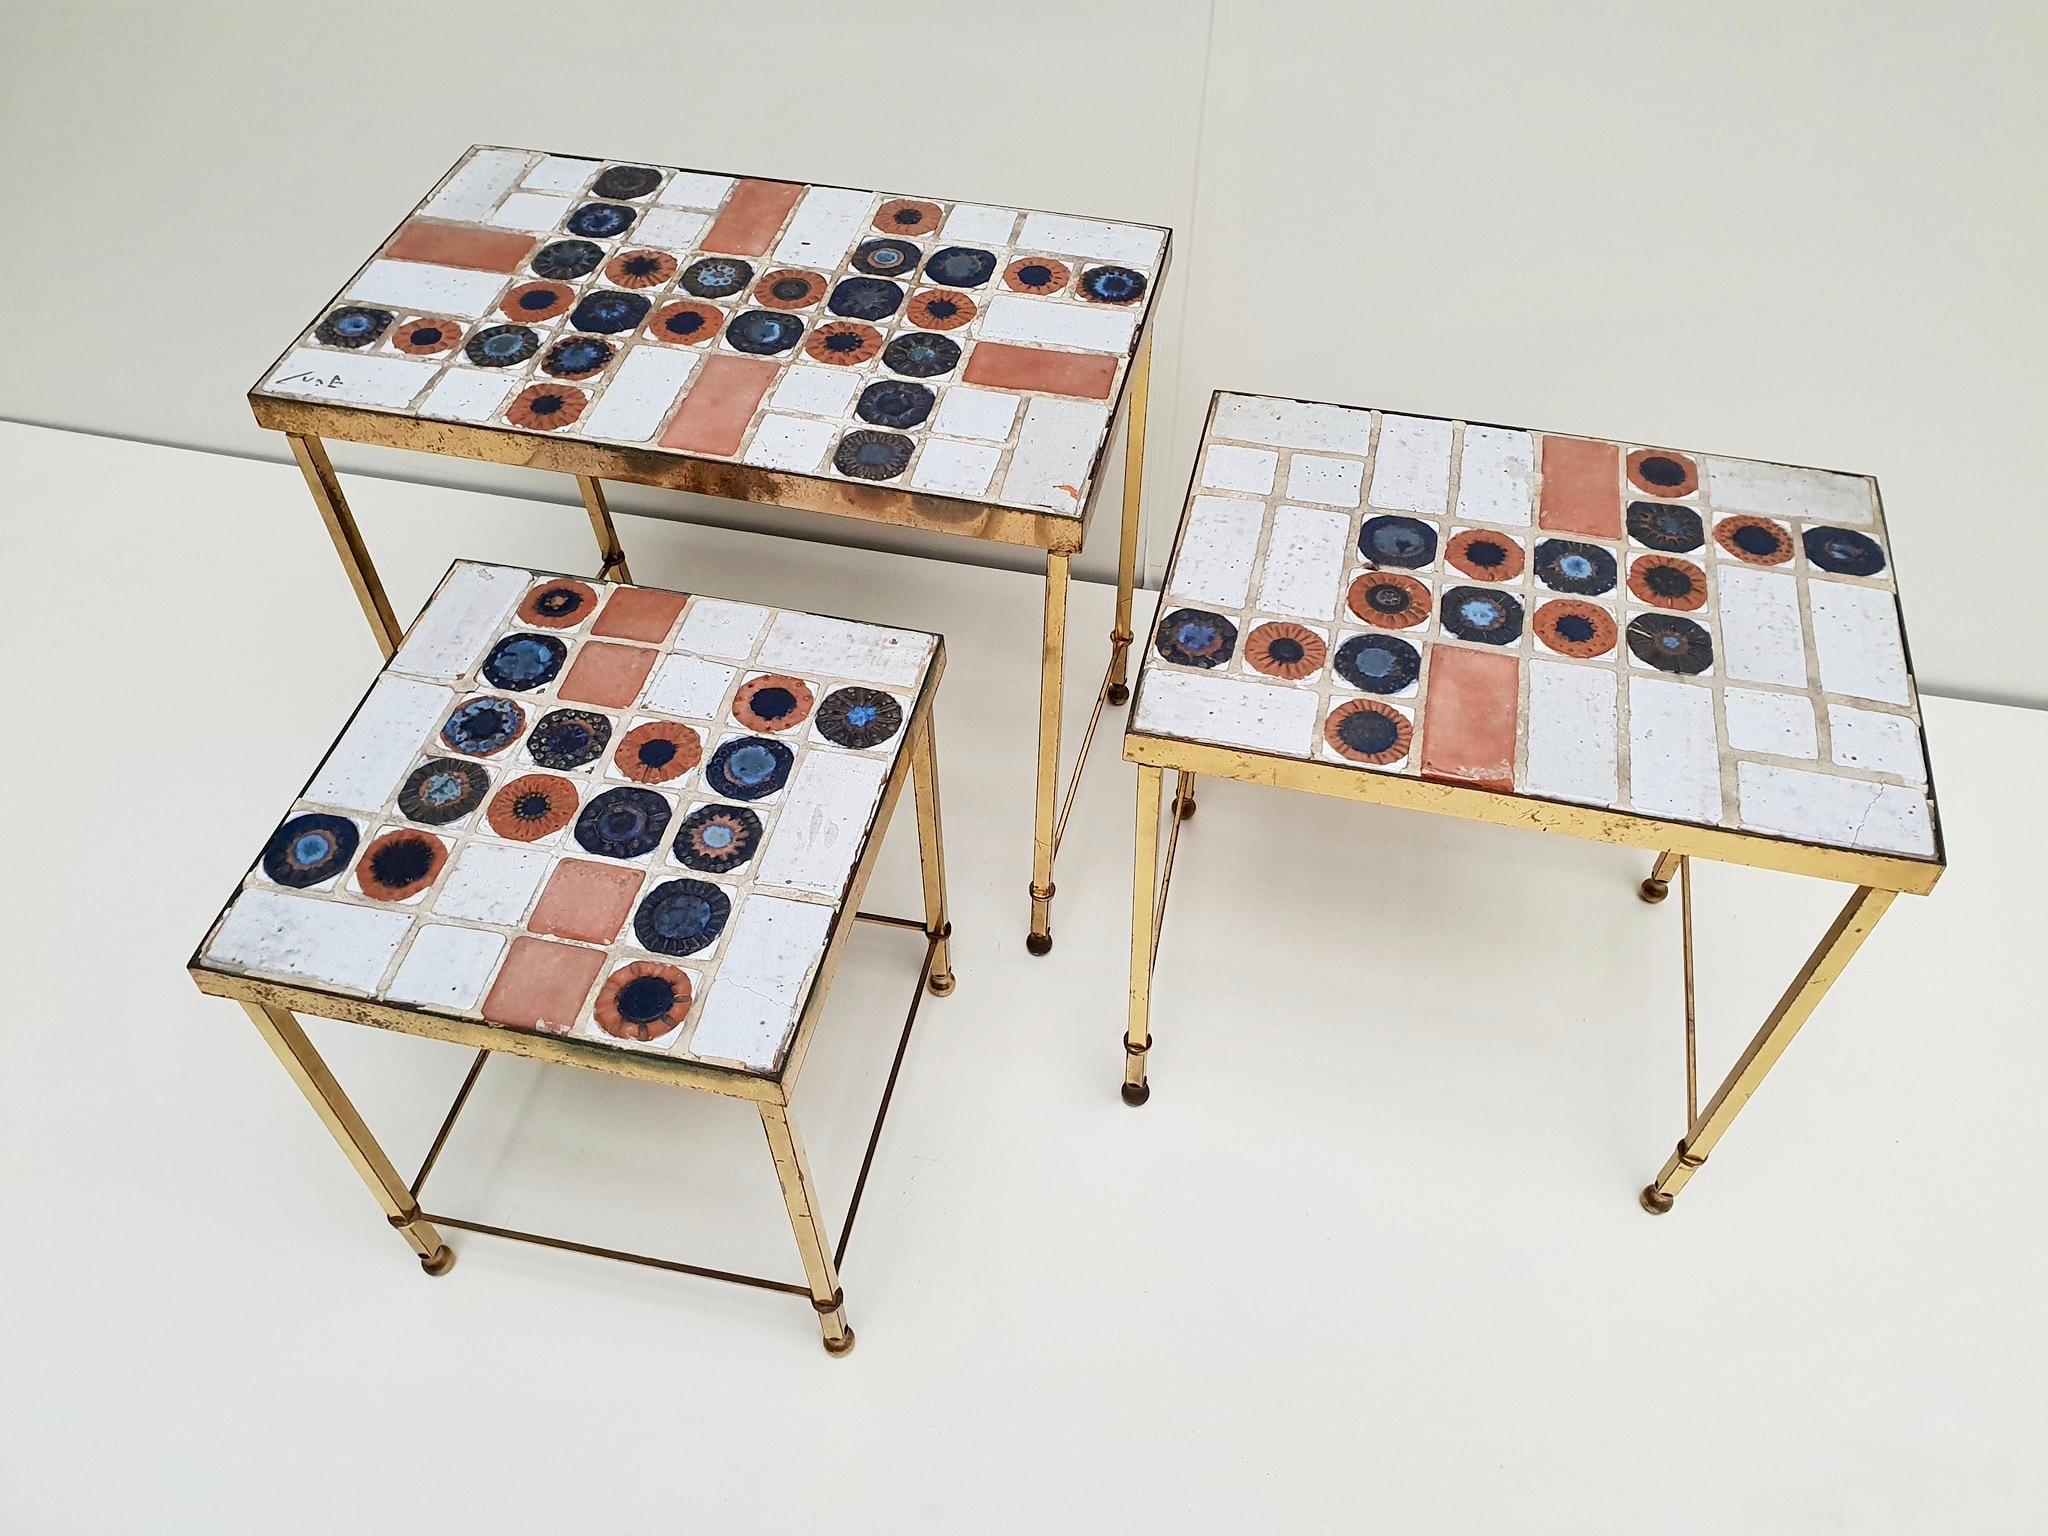 A set of 3 vintage Belgian ceramic nesting tables with polished brass frame. They were made in Italy and signed but unreadable.
Measure: Height 47 - 42 - 39 cm.
Width 57 - 41 - 31 cm.
Depth 31 - 31 - 31 cm.